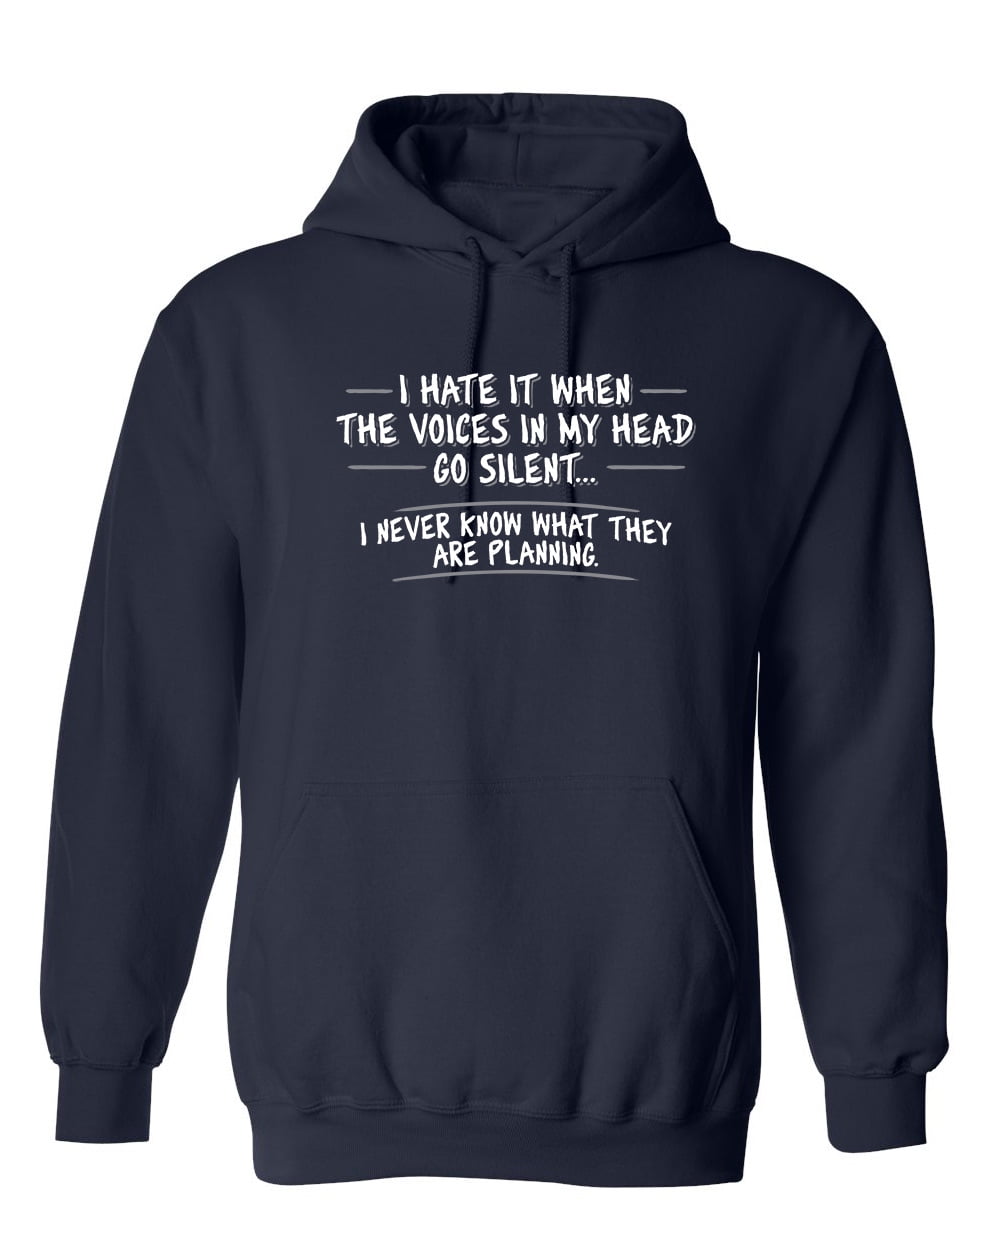 I Hate It When The Voices Go Silent Sarcastic Novelty Gift Idea Adult Humor  Funny Men's Hoodies 